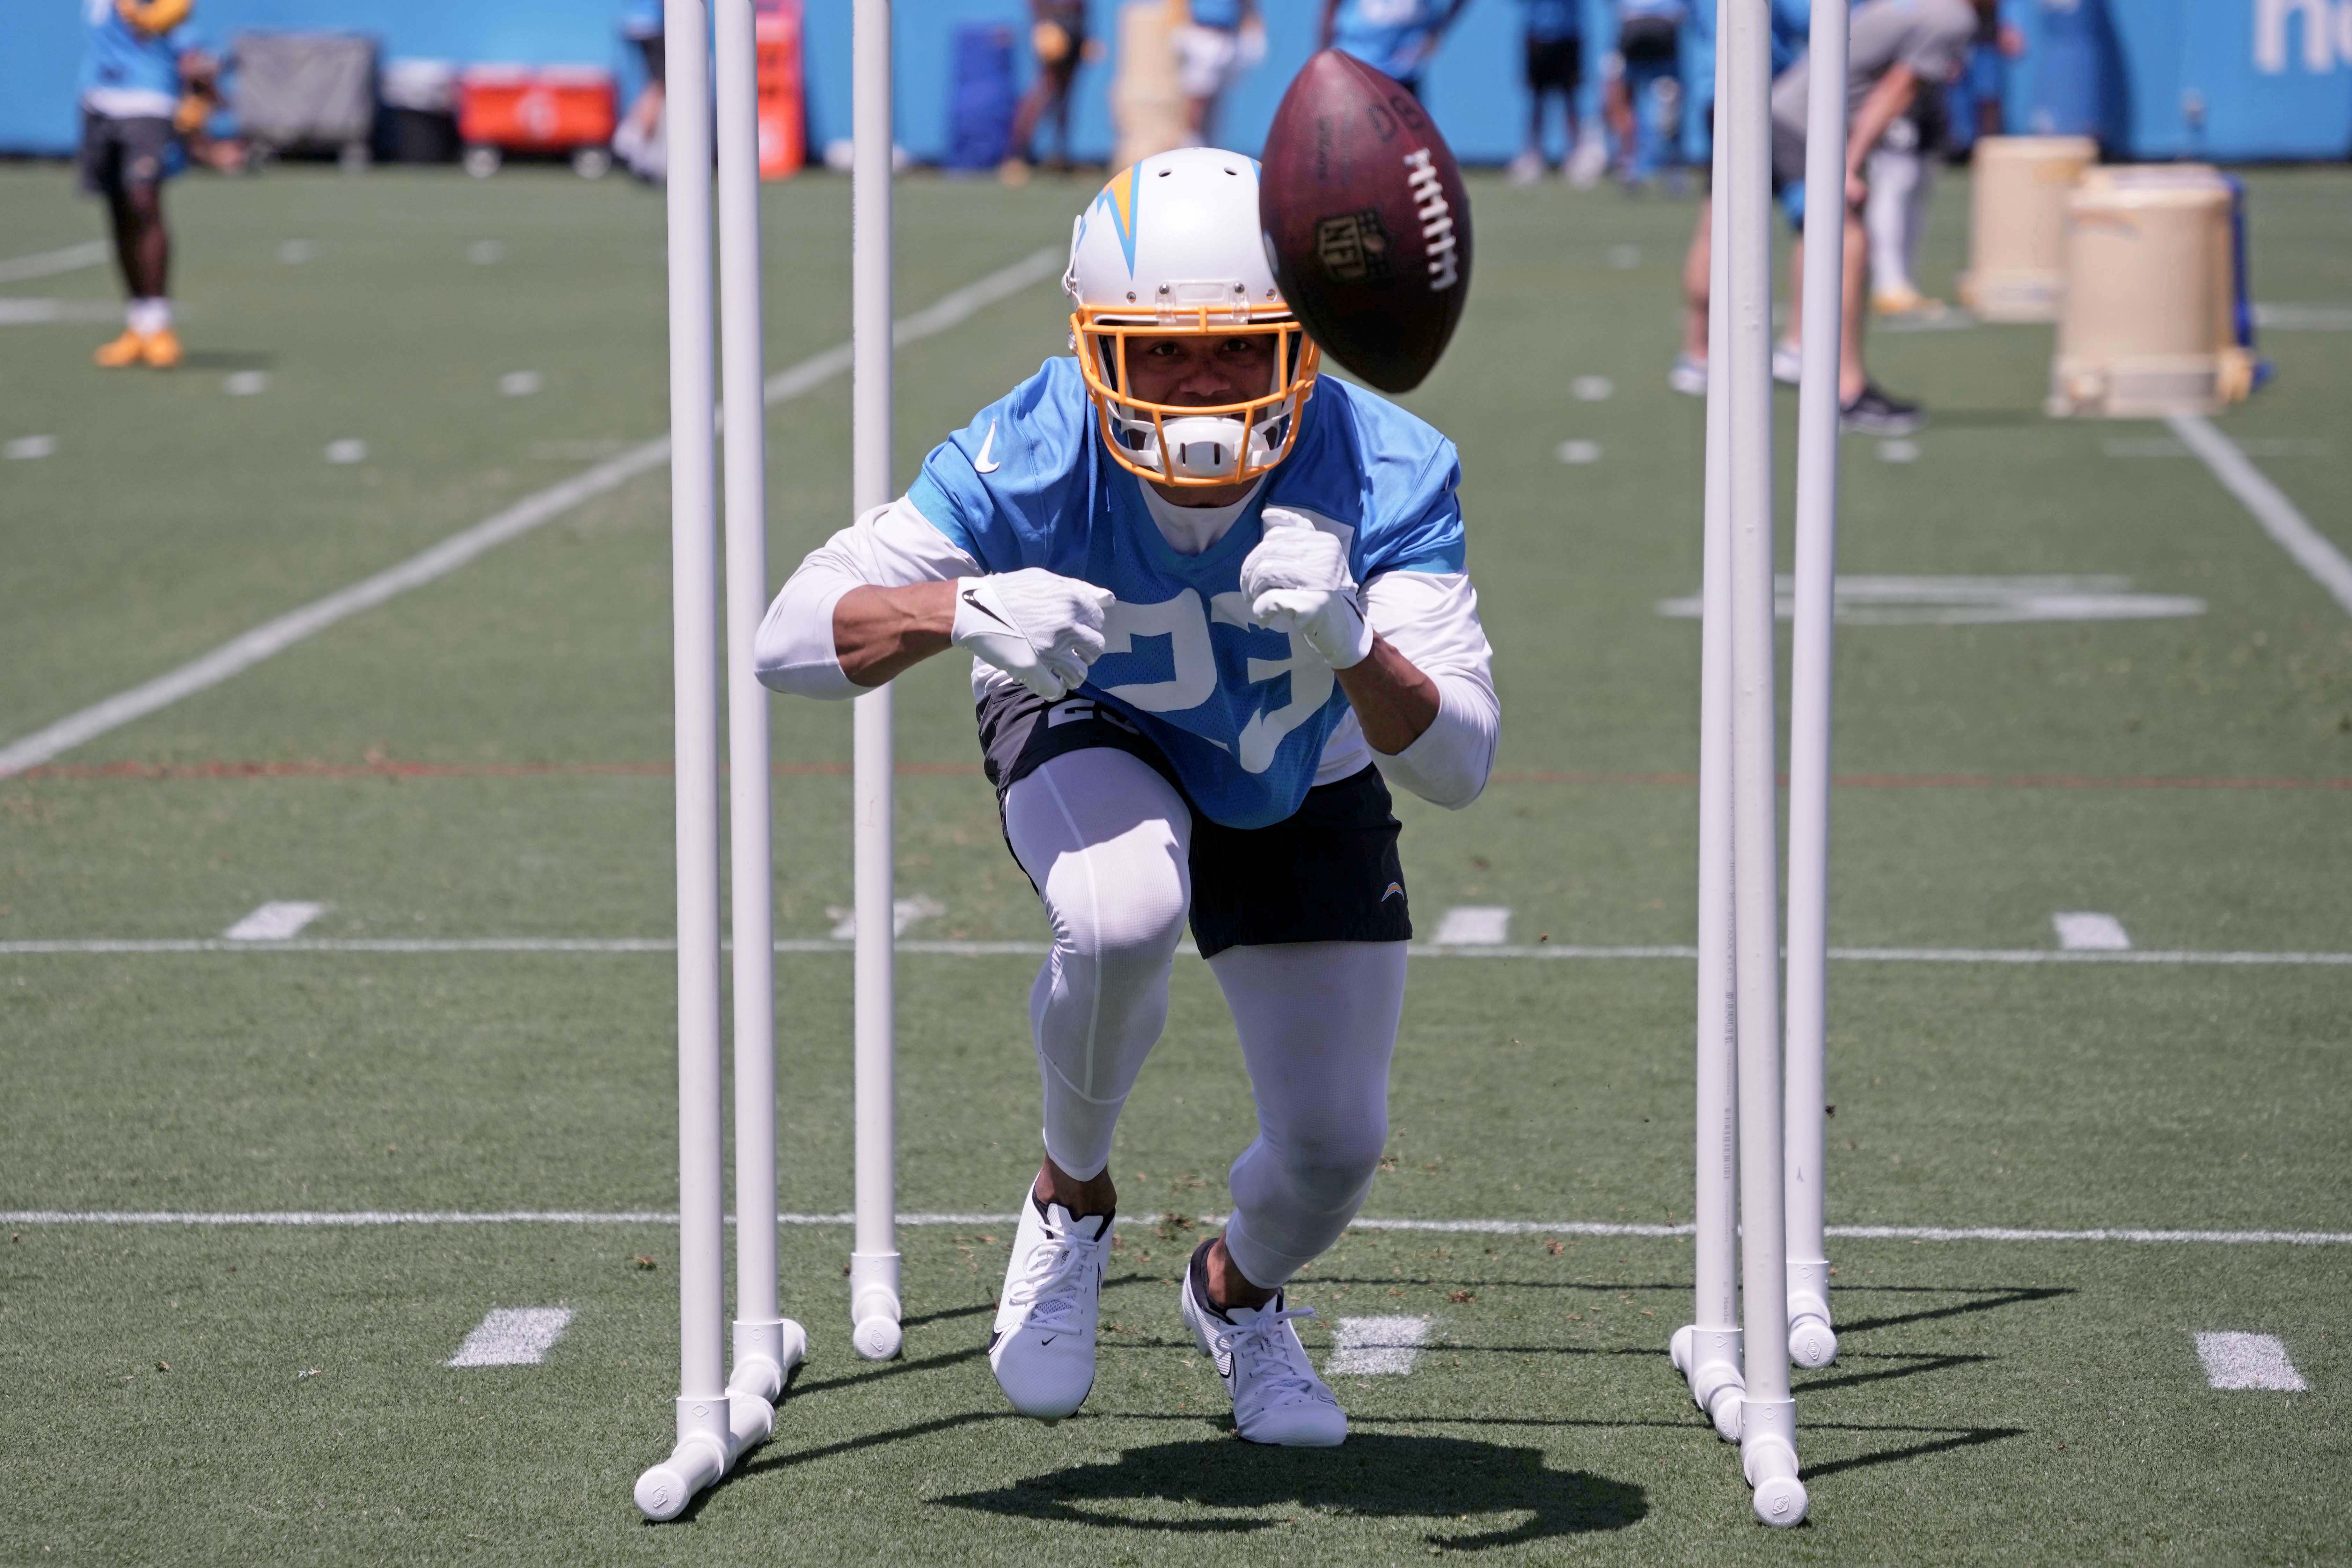 Los Angeles Chargers cornerback Bryce Callahan takes part in workouts at organized team activities on June 1.